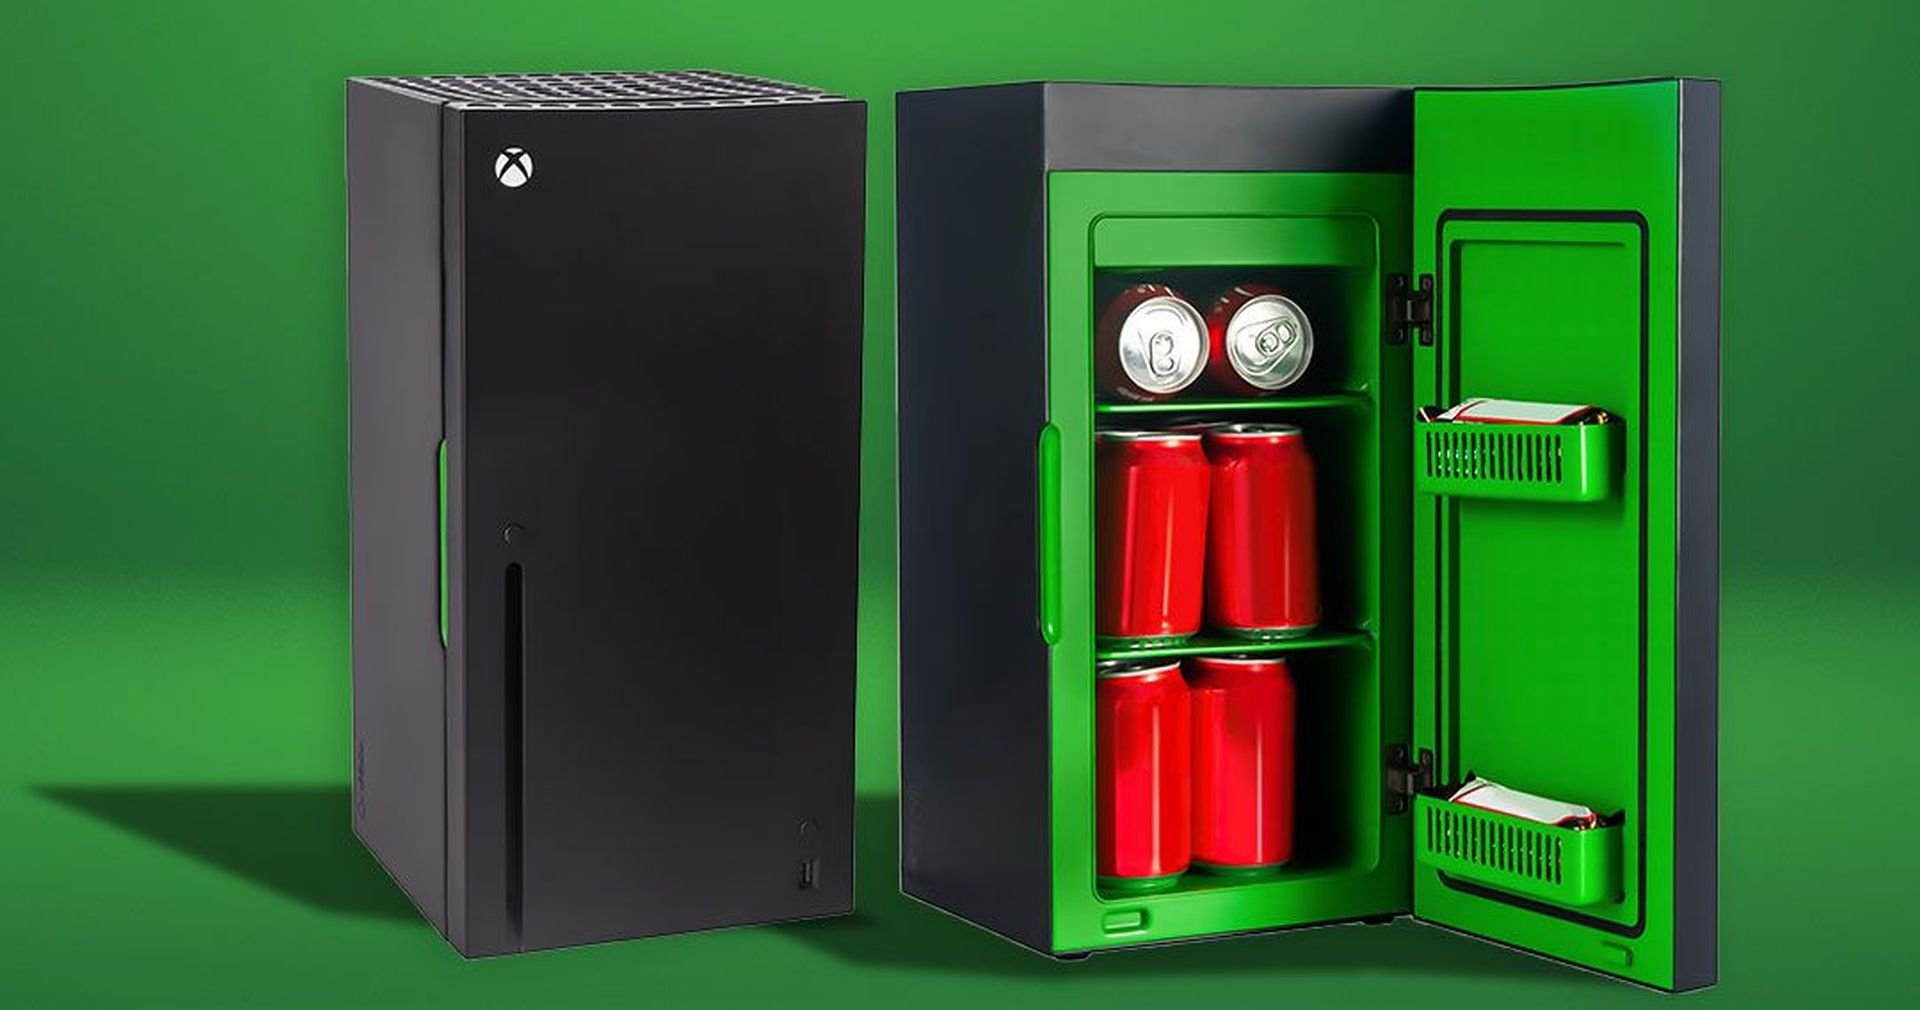 Keep Your Gaming Fuel Cold With New Xbox Series X Mini Fridge — GeekTyrant